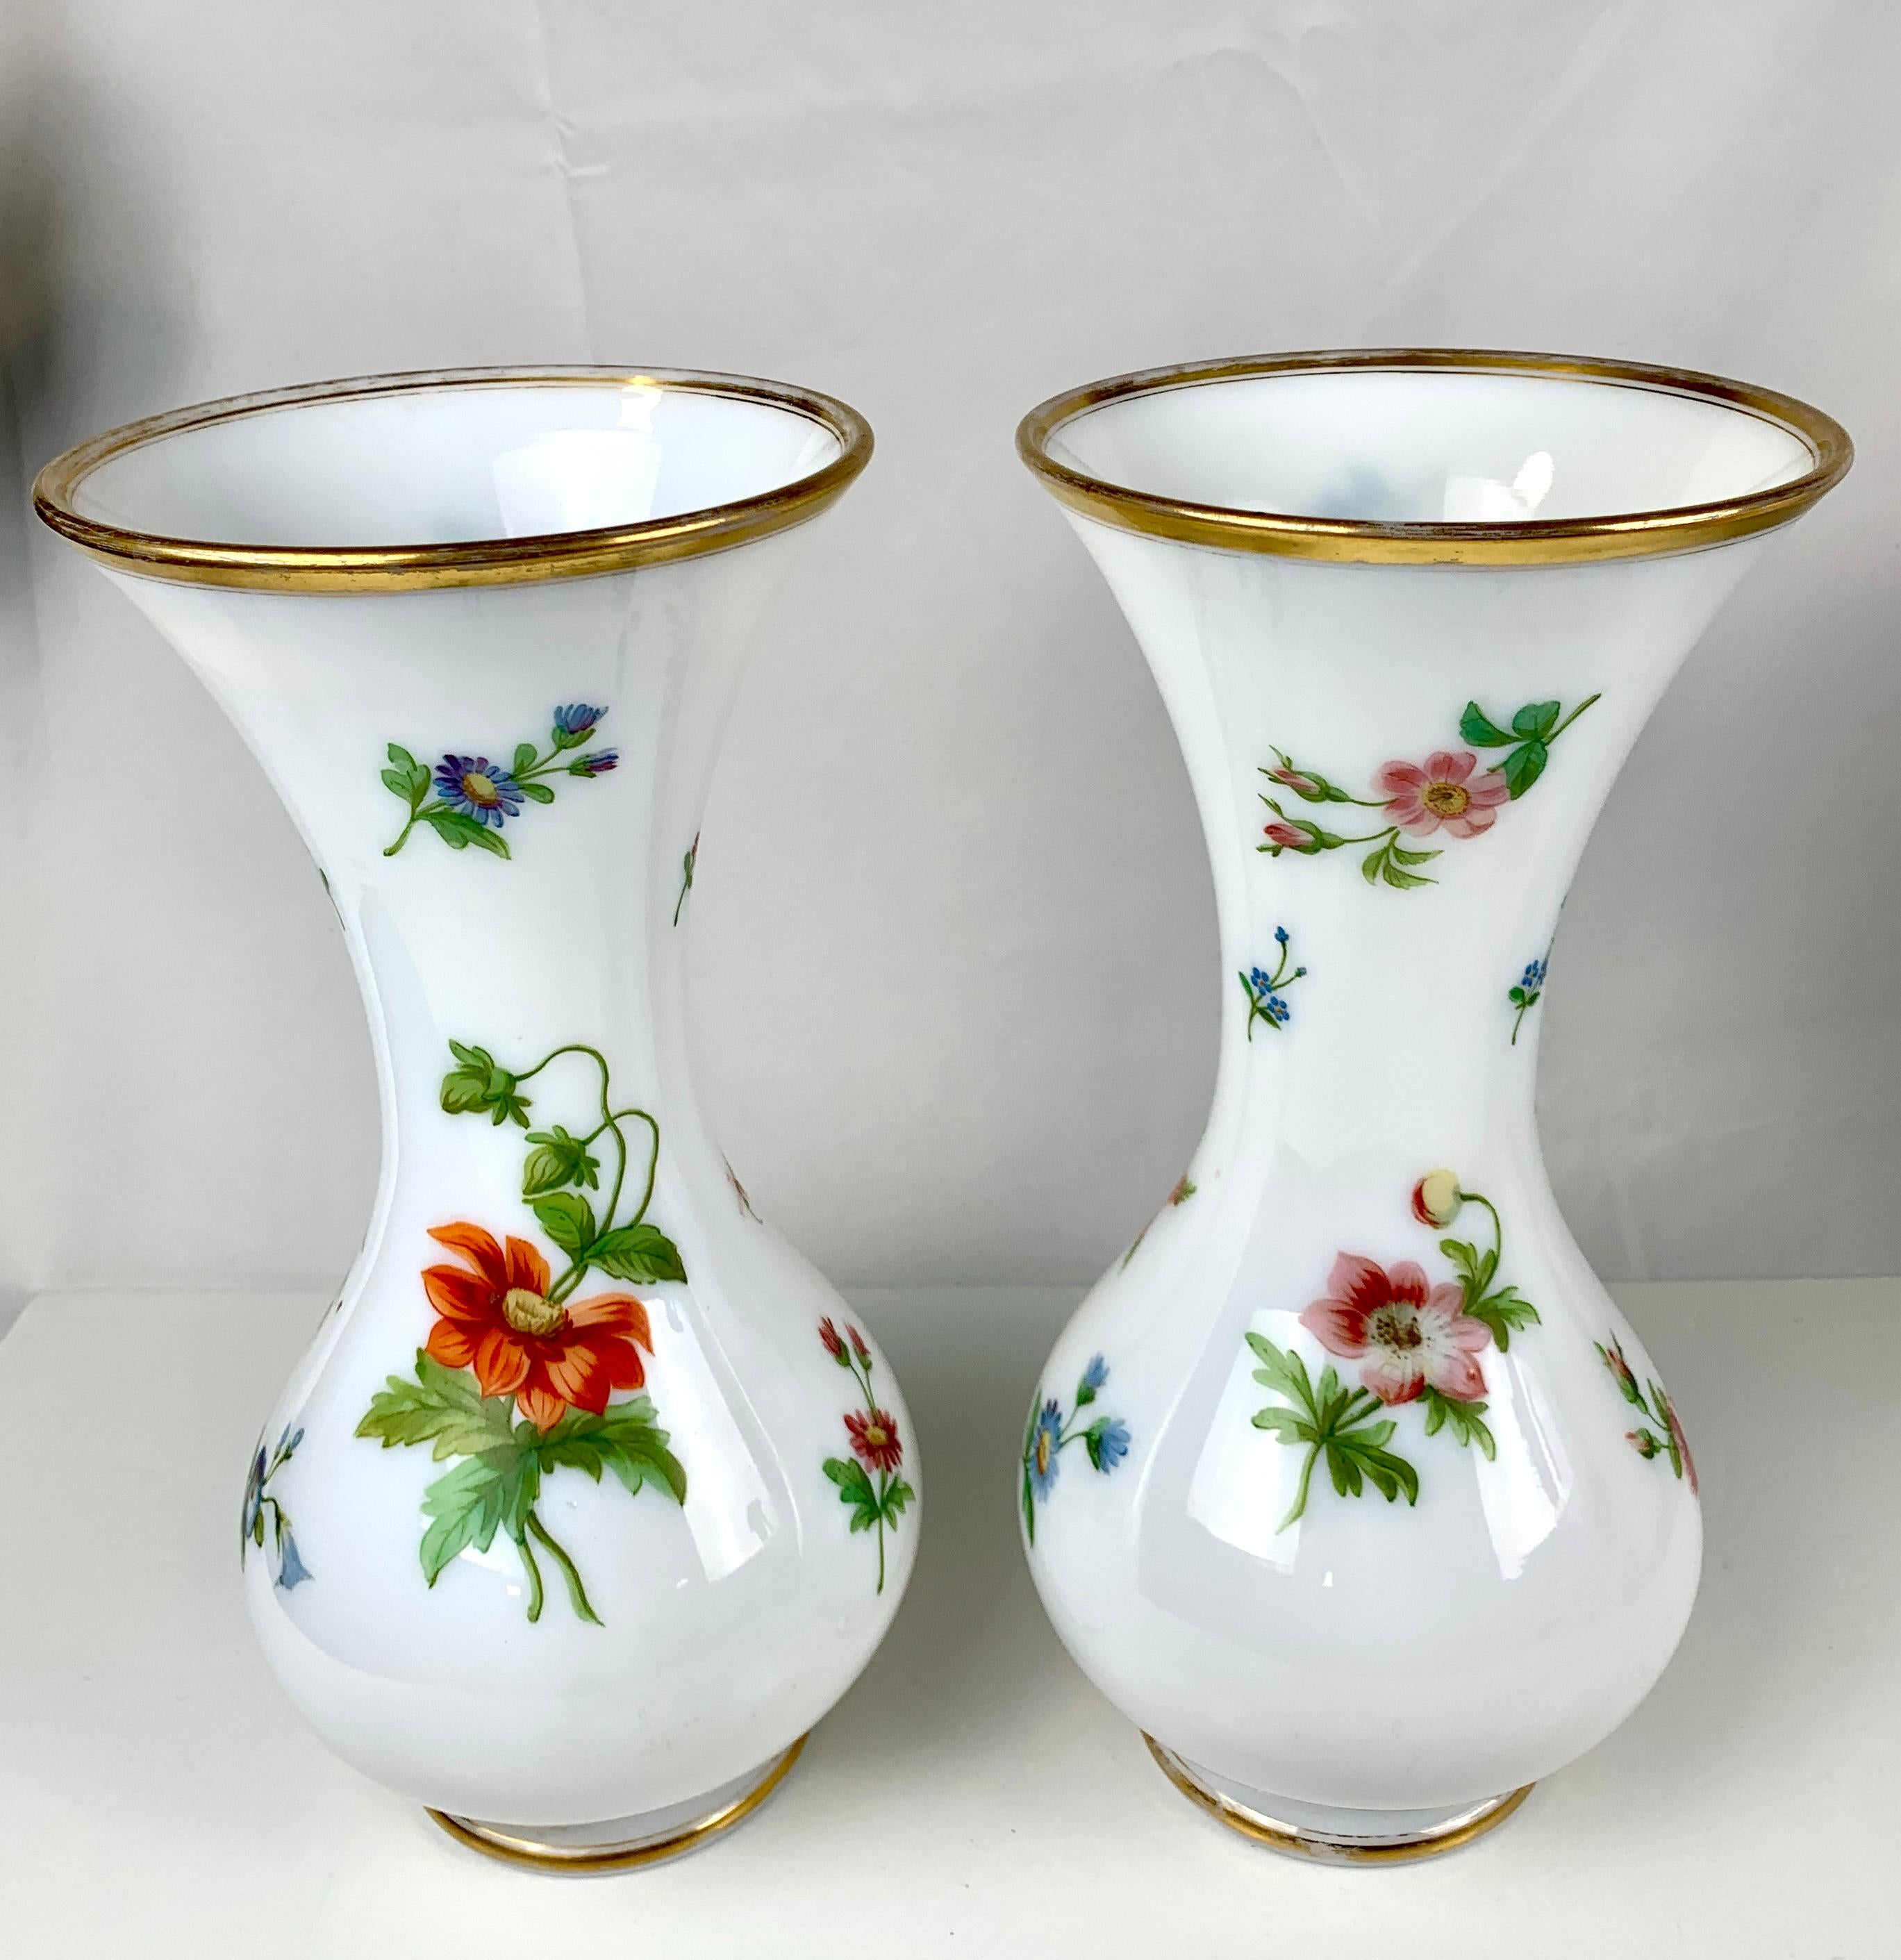 Pair of vases with hand-painted flowers on opaline glass. 
We see pink, purple, orange, lilac, and white flowers, all naturalistically rendered.
The roses, daisies, and morning glory are marvelous!
The leaves are painted in several shades of